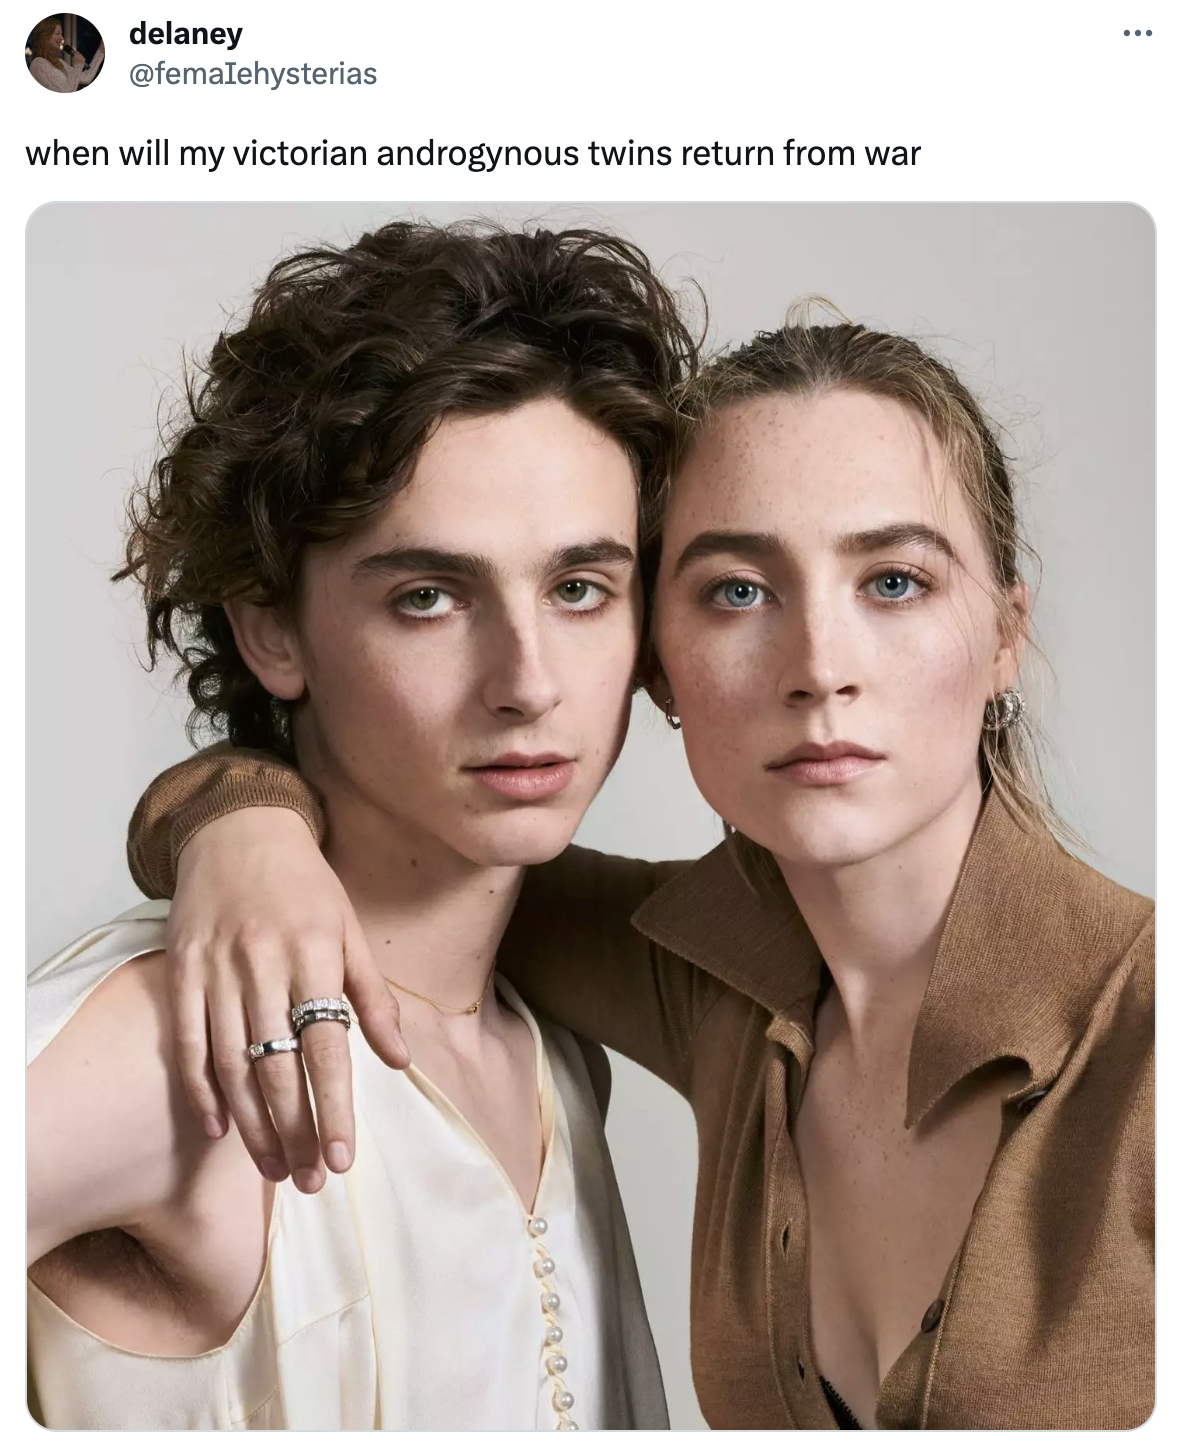 twitter highlights funny tweets  - timothee chalamet saoirse ronan - delaney when will my victorian androgynous twins return from war 33 313 31